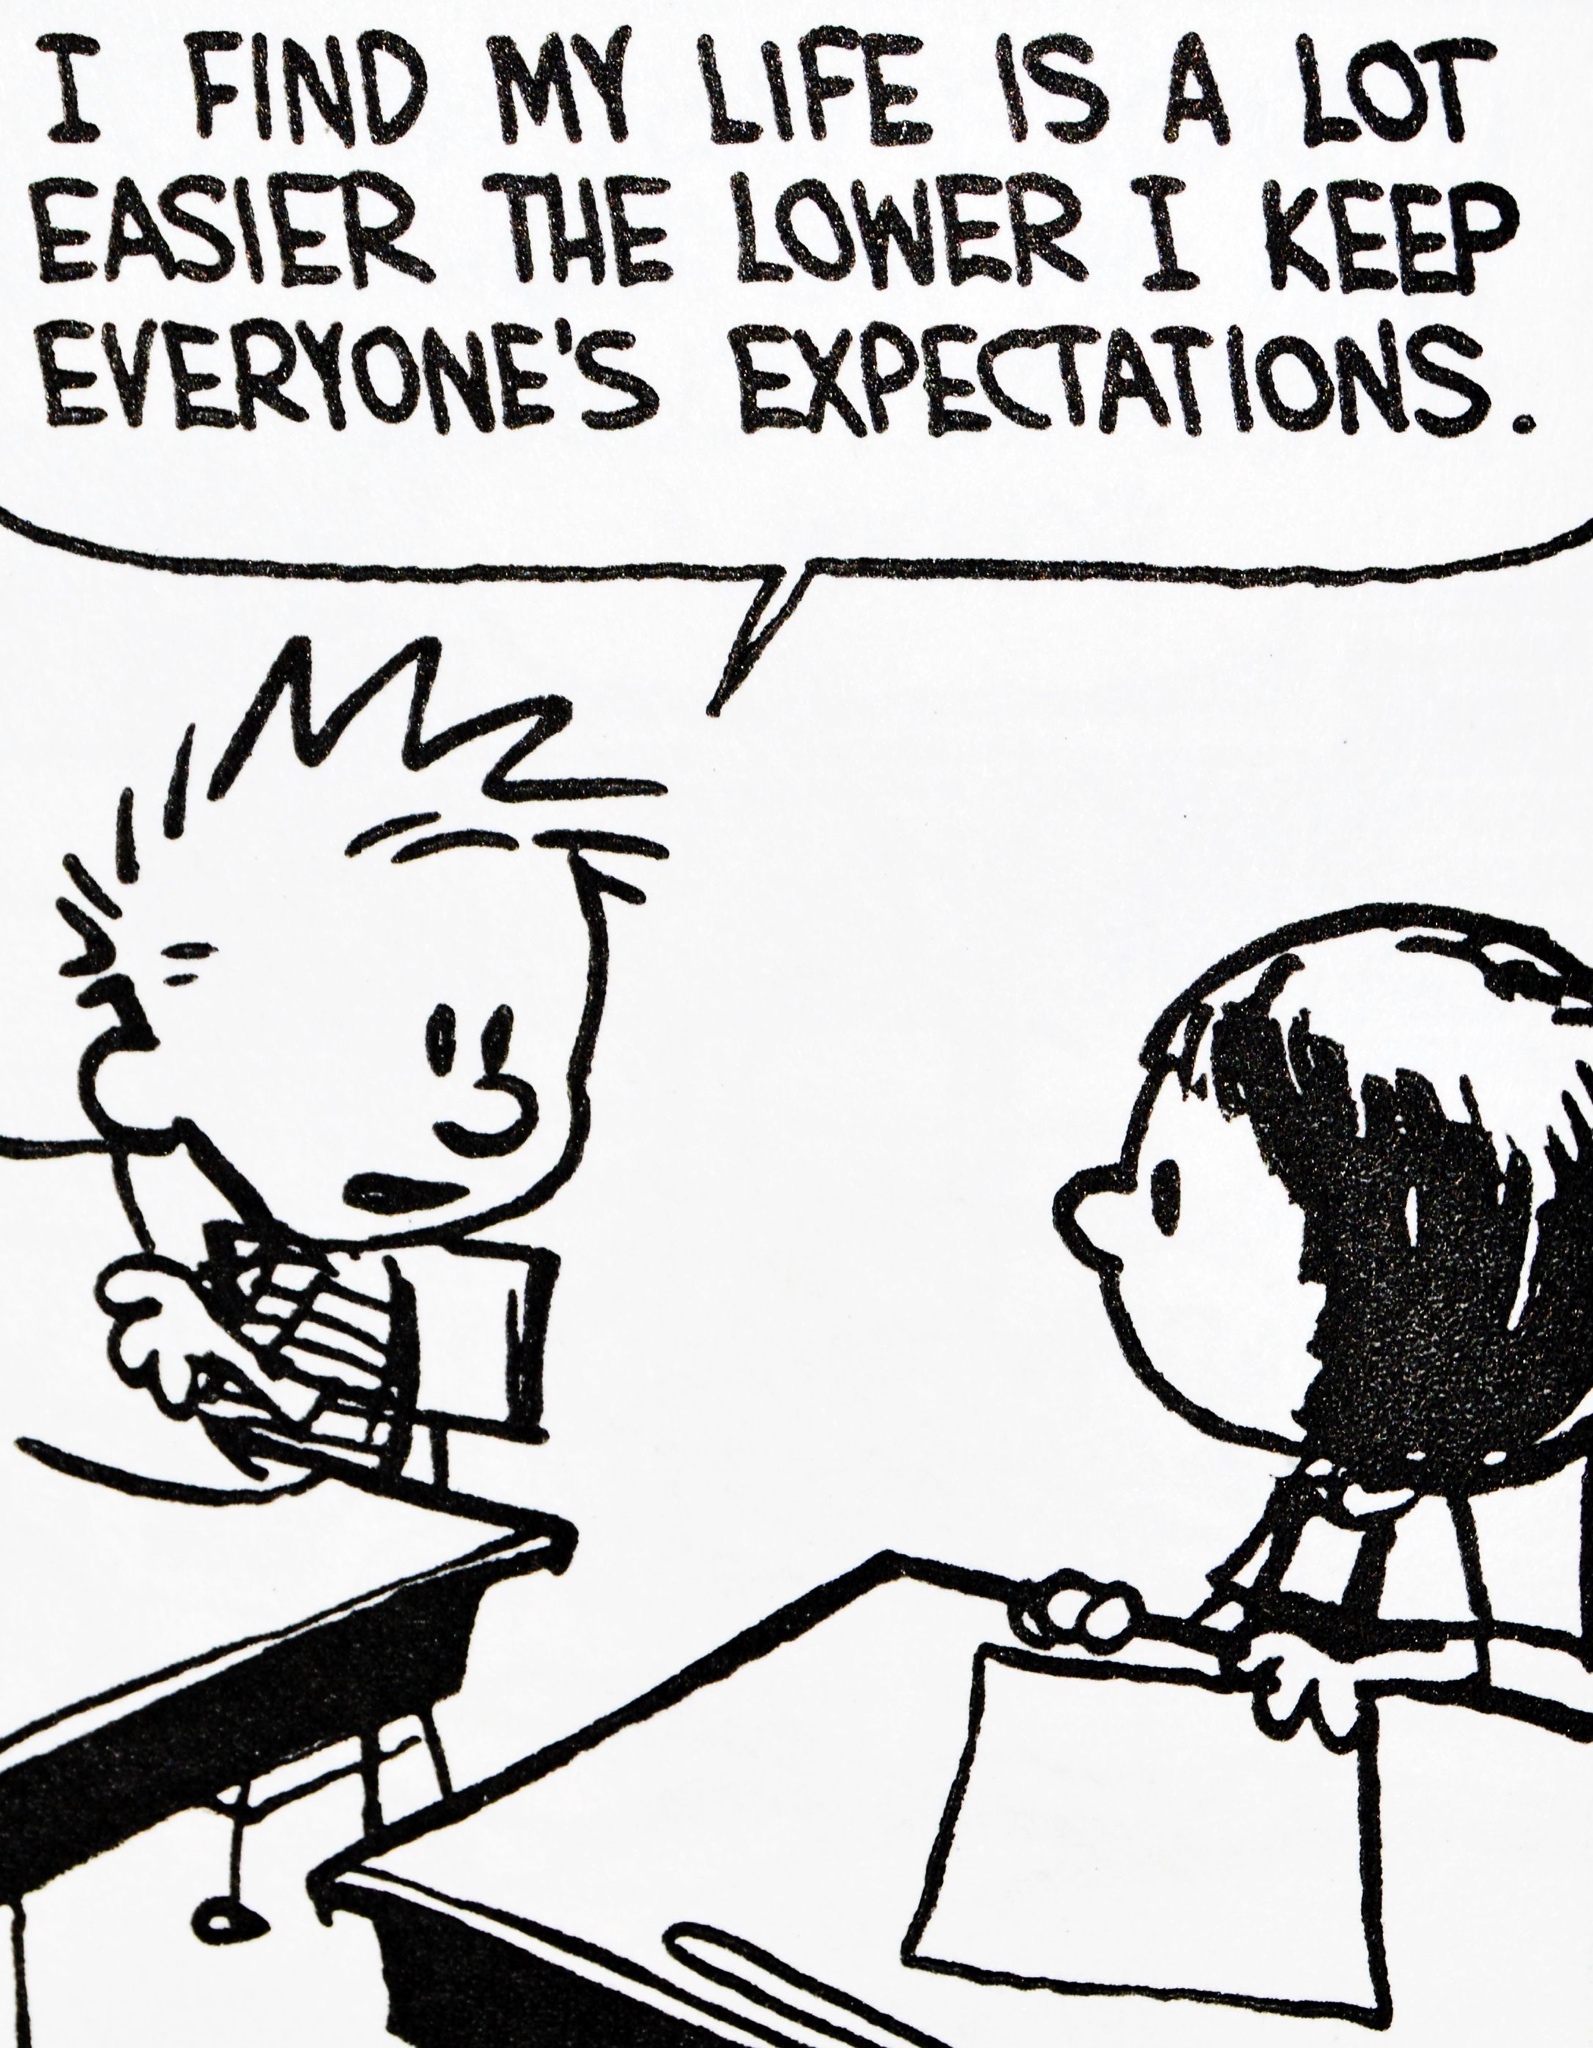 funniest calvin and hobbes quotes - I Find My Life Is A Lot Easier The Lower I Keep Everyone'S Expectations.